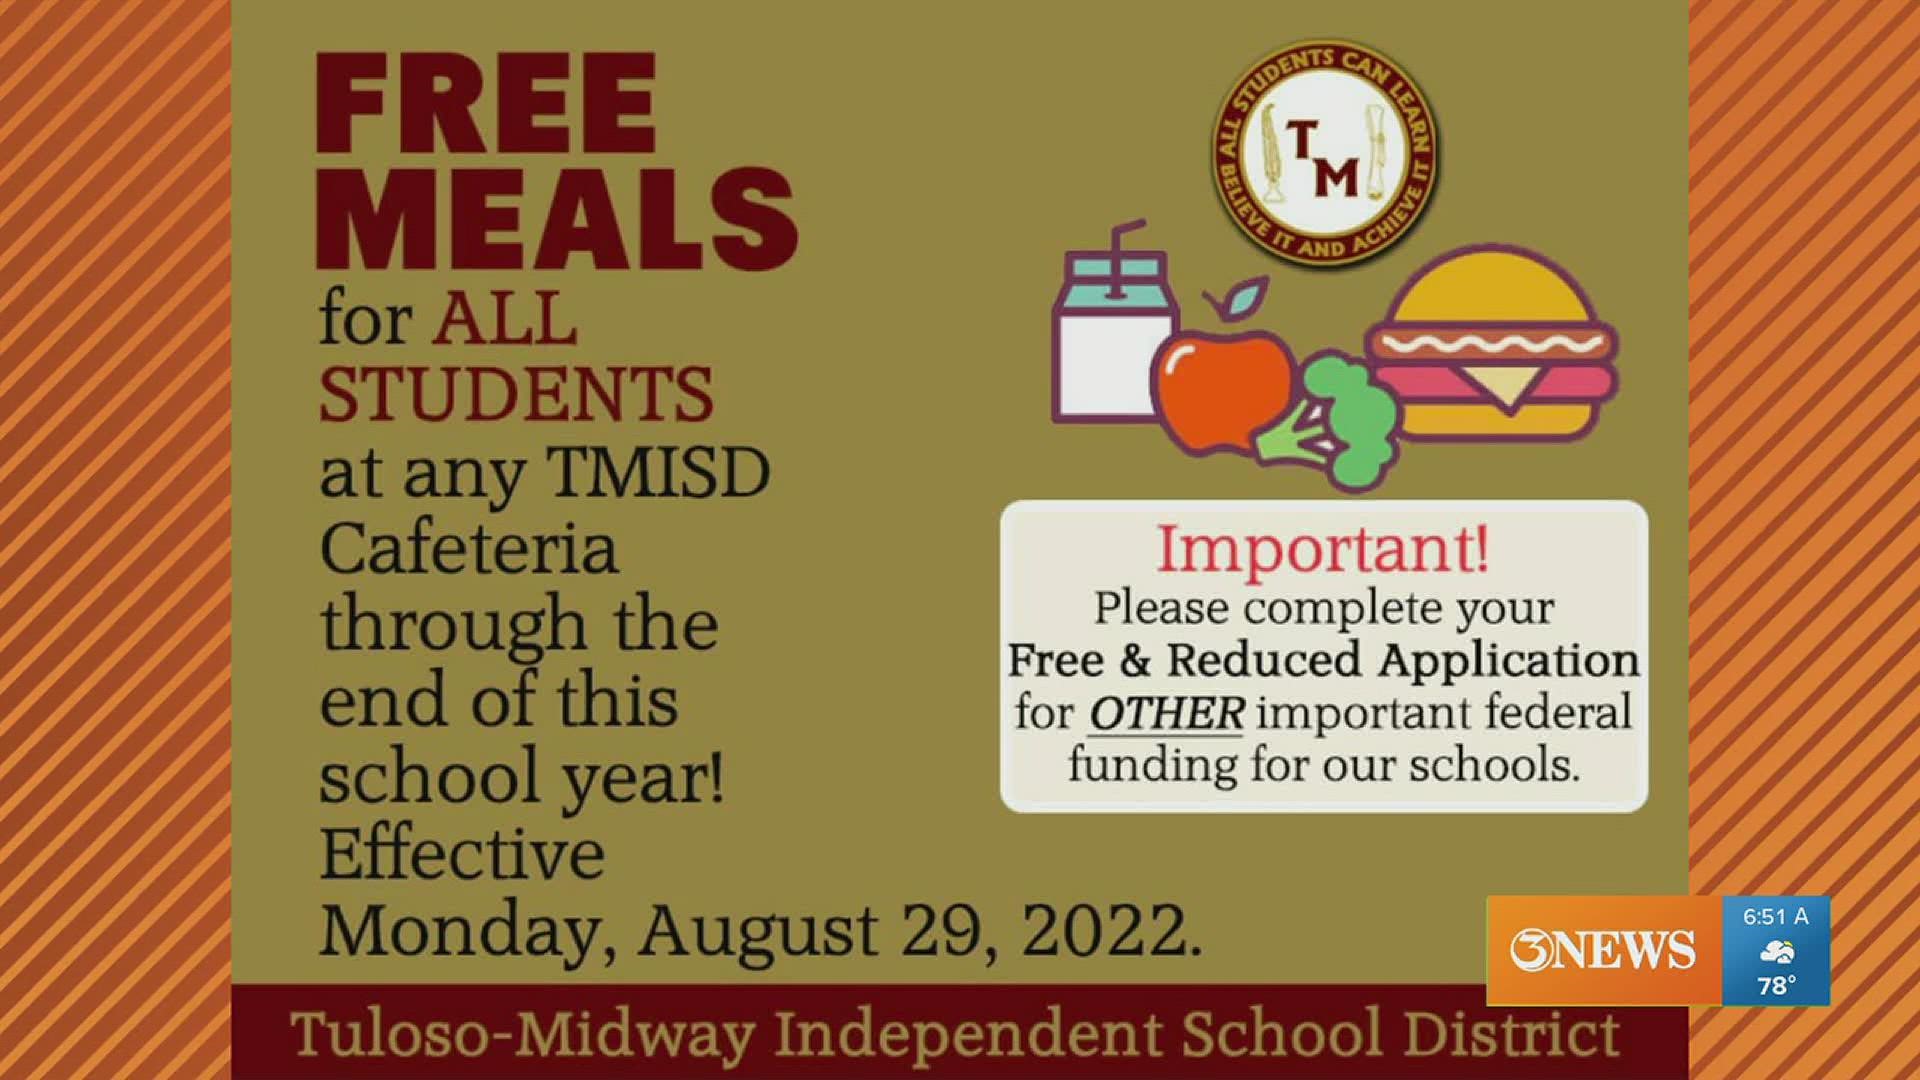 Tuloso-Midway ISD offering free breakfast and lunch to all students at any Tuloso-Midway ISD cafeteria throughout this school year.